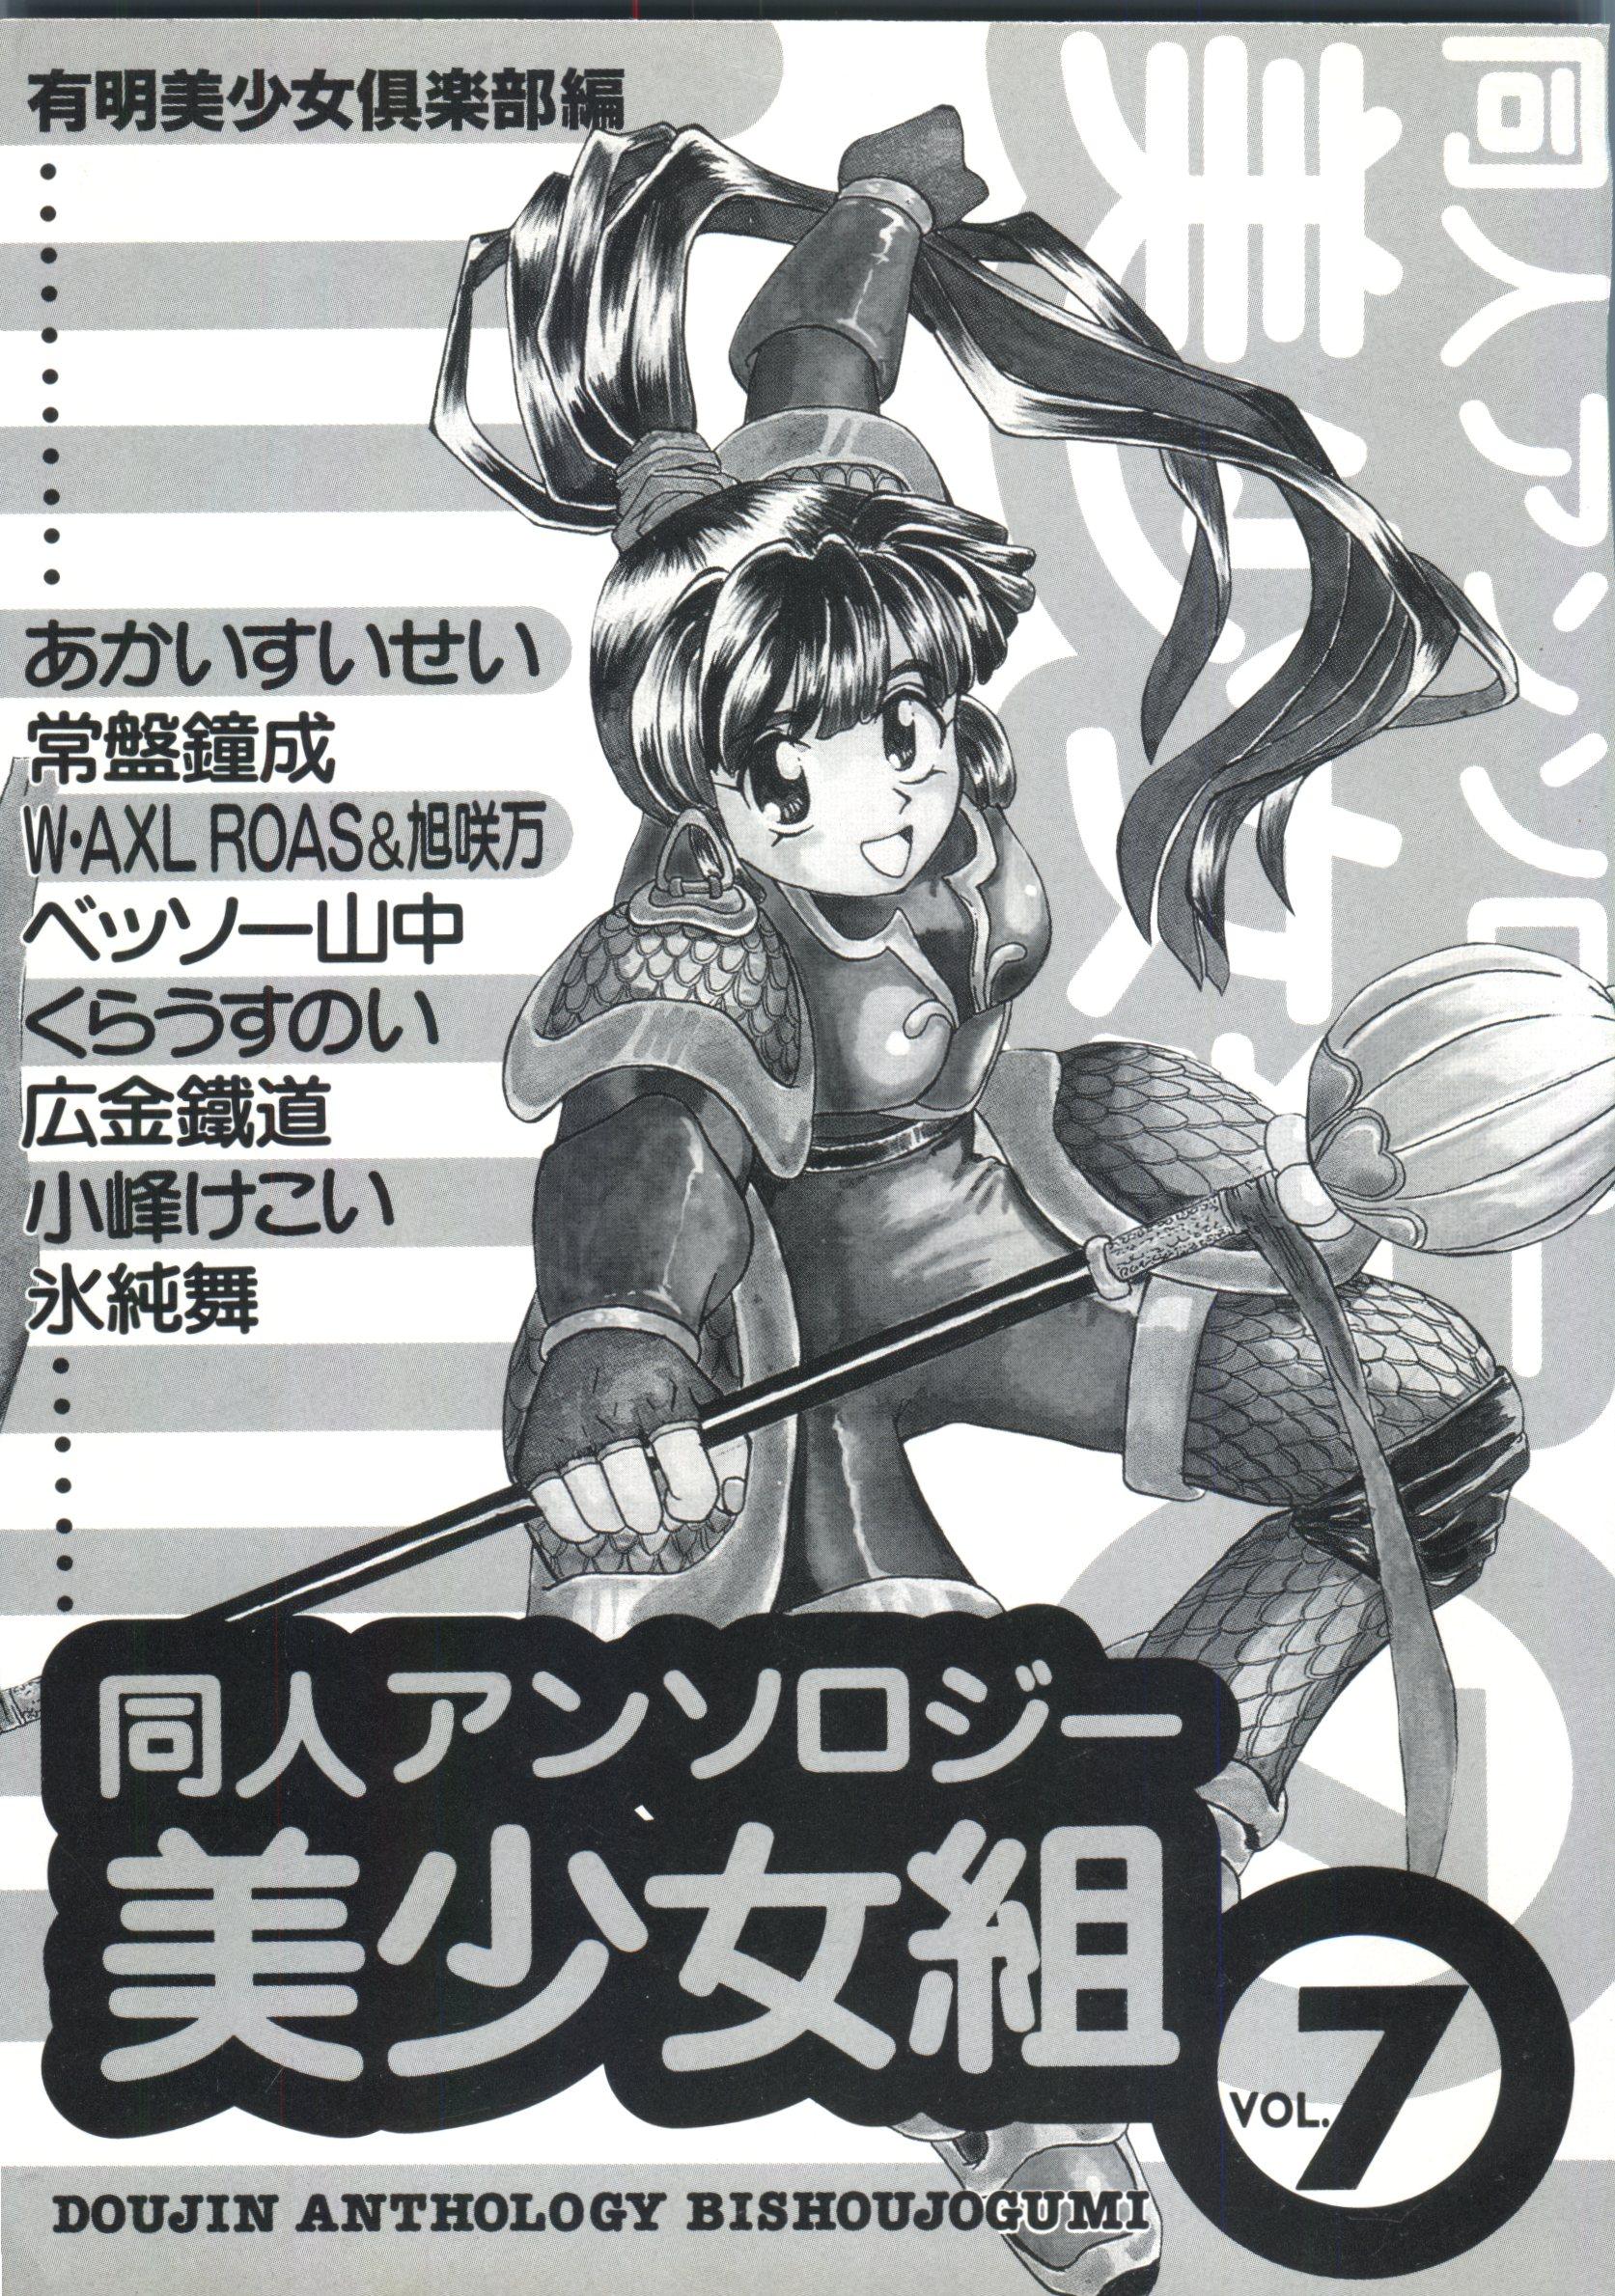 Piercing Doujin Anthology Bishoujo Gumi 7 - Neon genesis evangelion Sailor moon King of fighters Magic knight rayearth Saint tail Role Play - Page 4